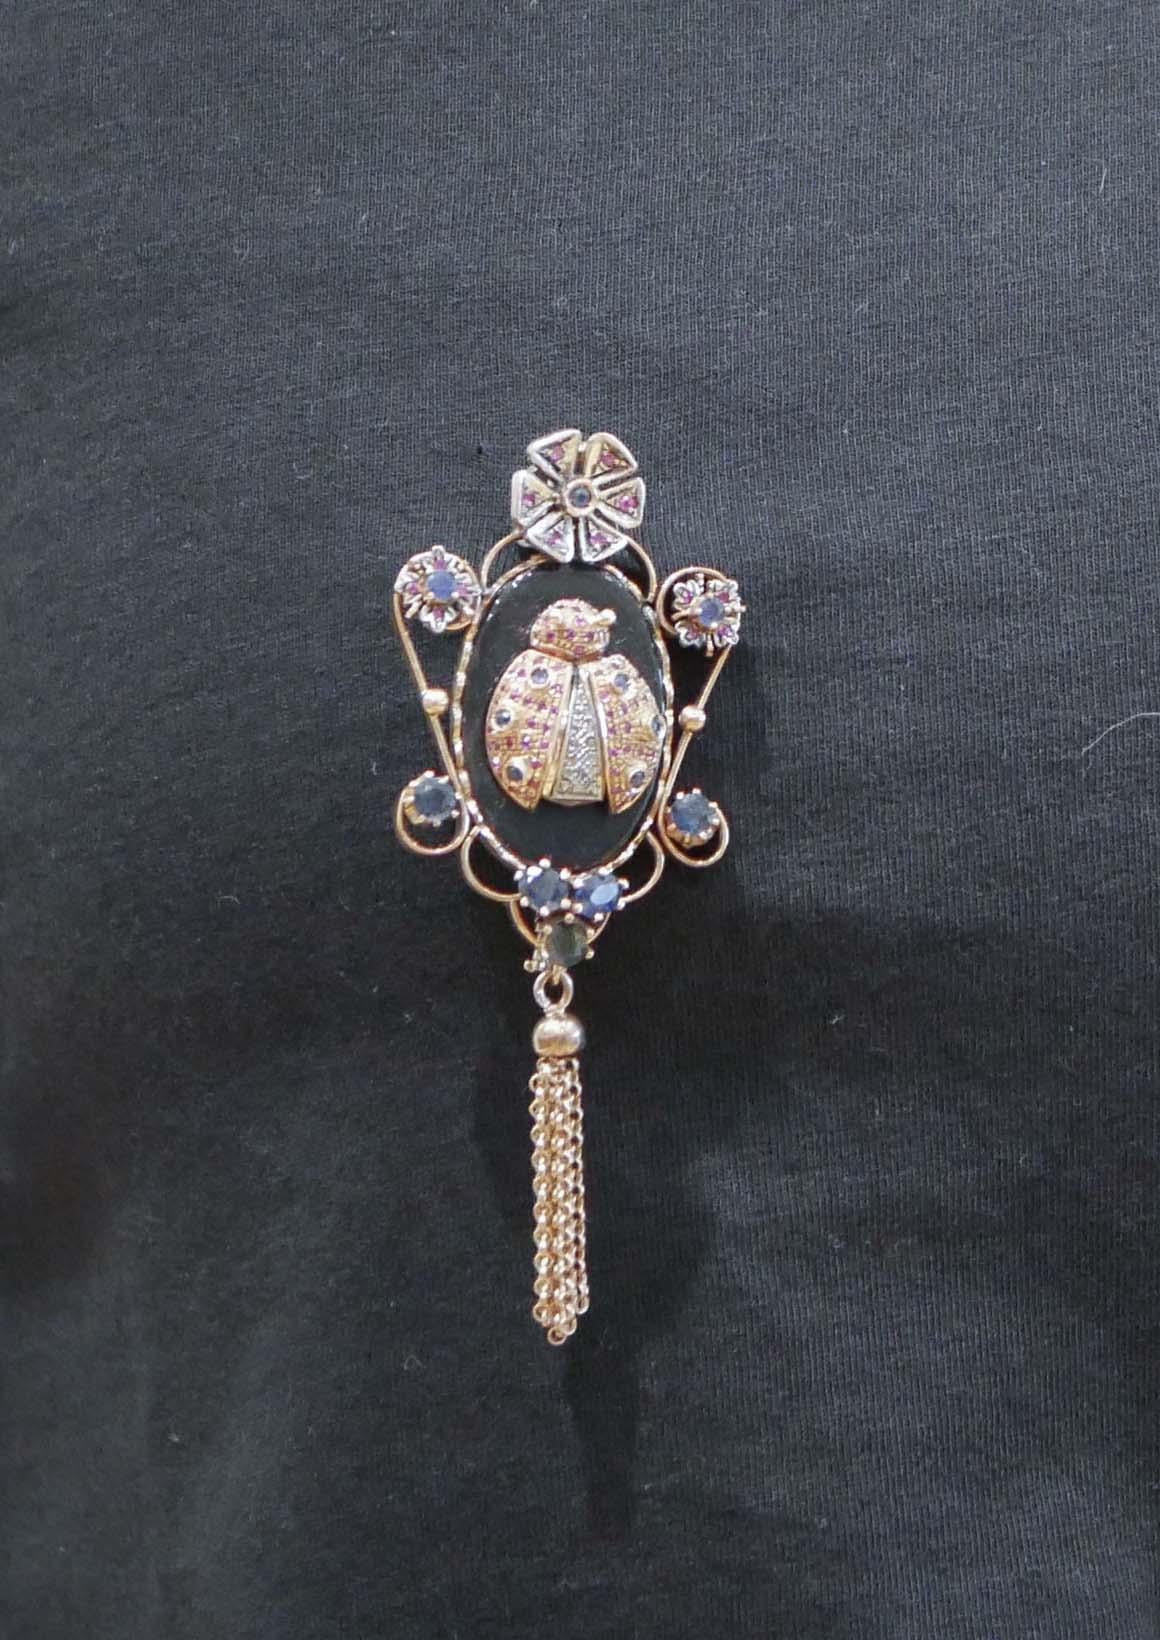 Sapphires, Rubies, Diamonds, Onyx, Rose Gold and Silver Brooch/Pendant Necklace. For Sale 1